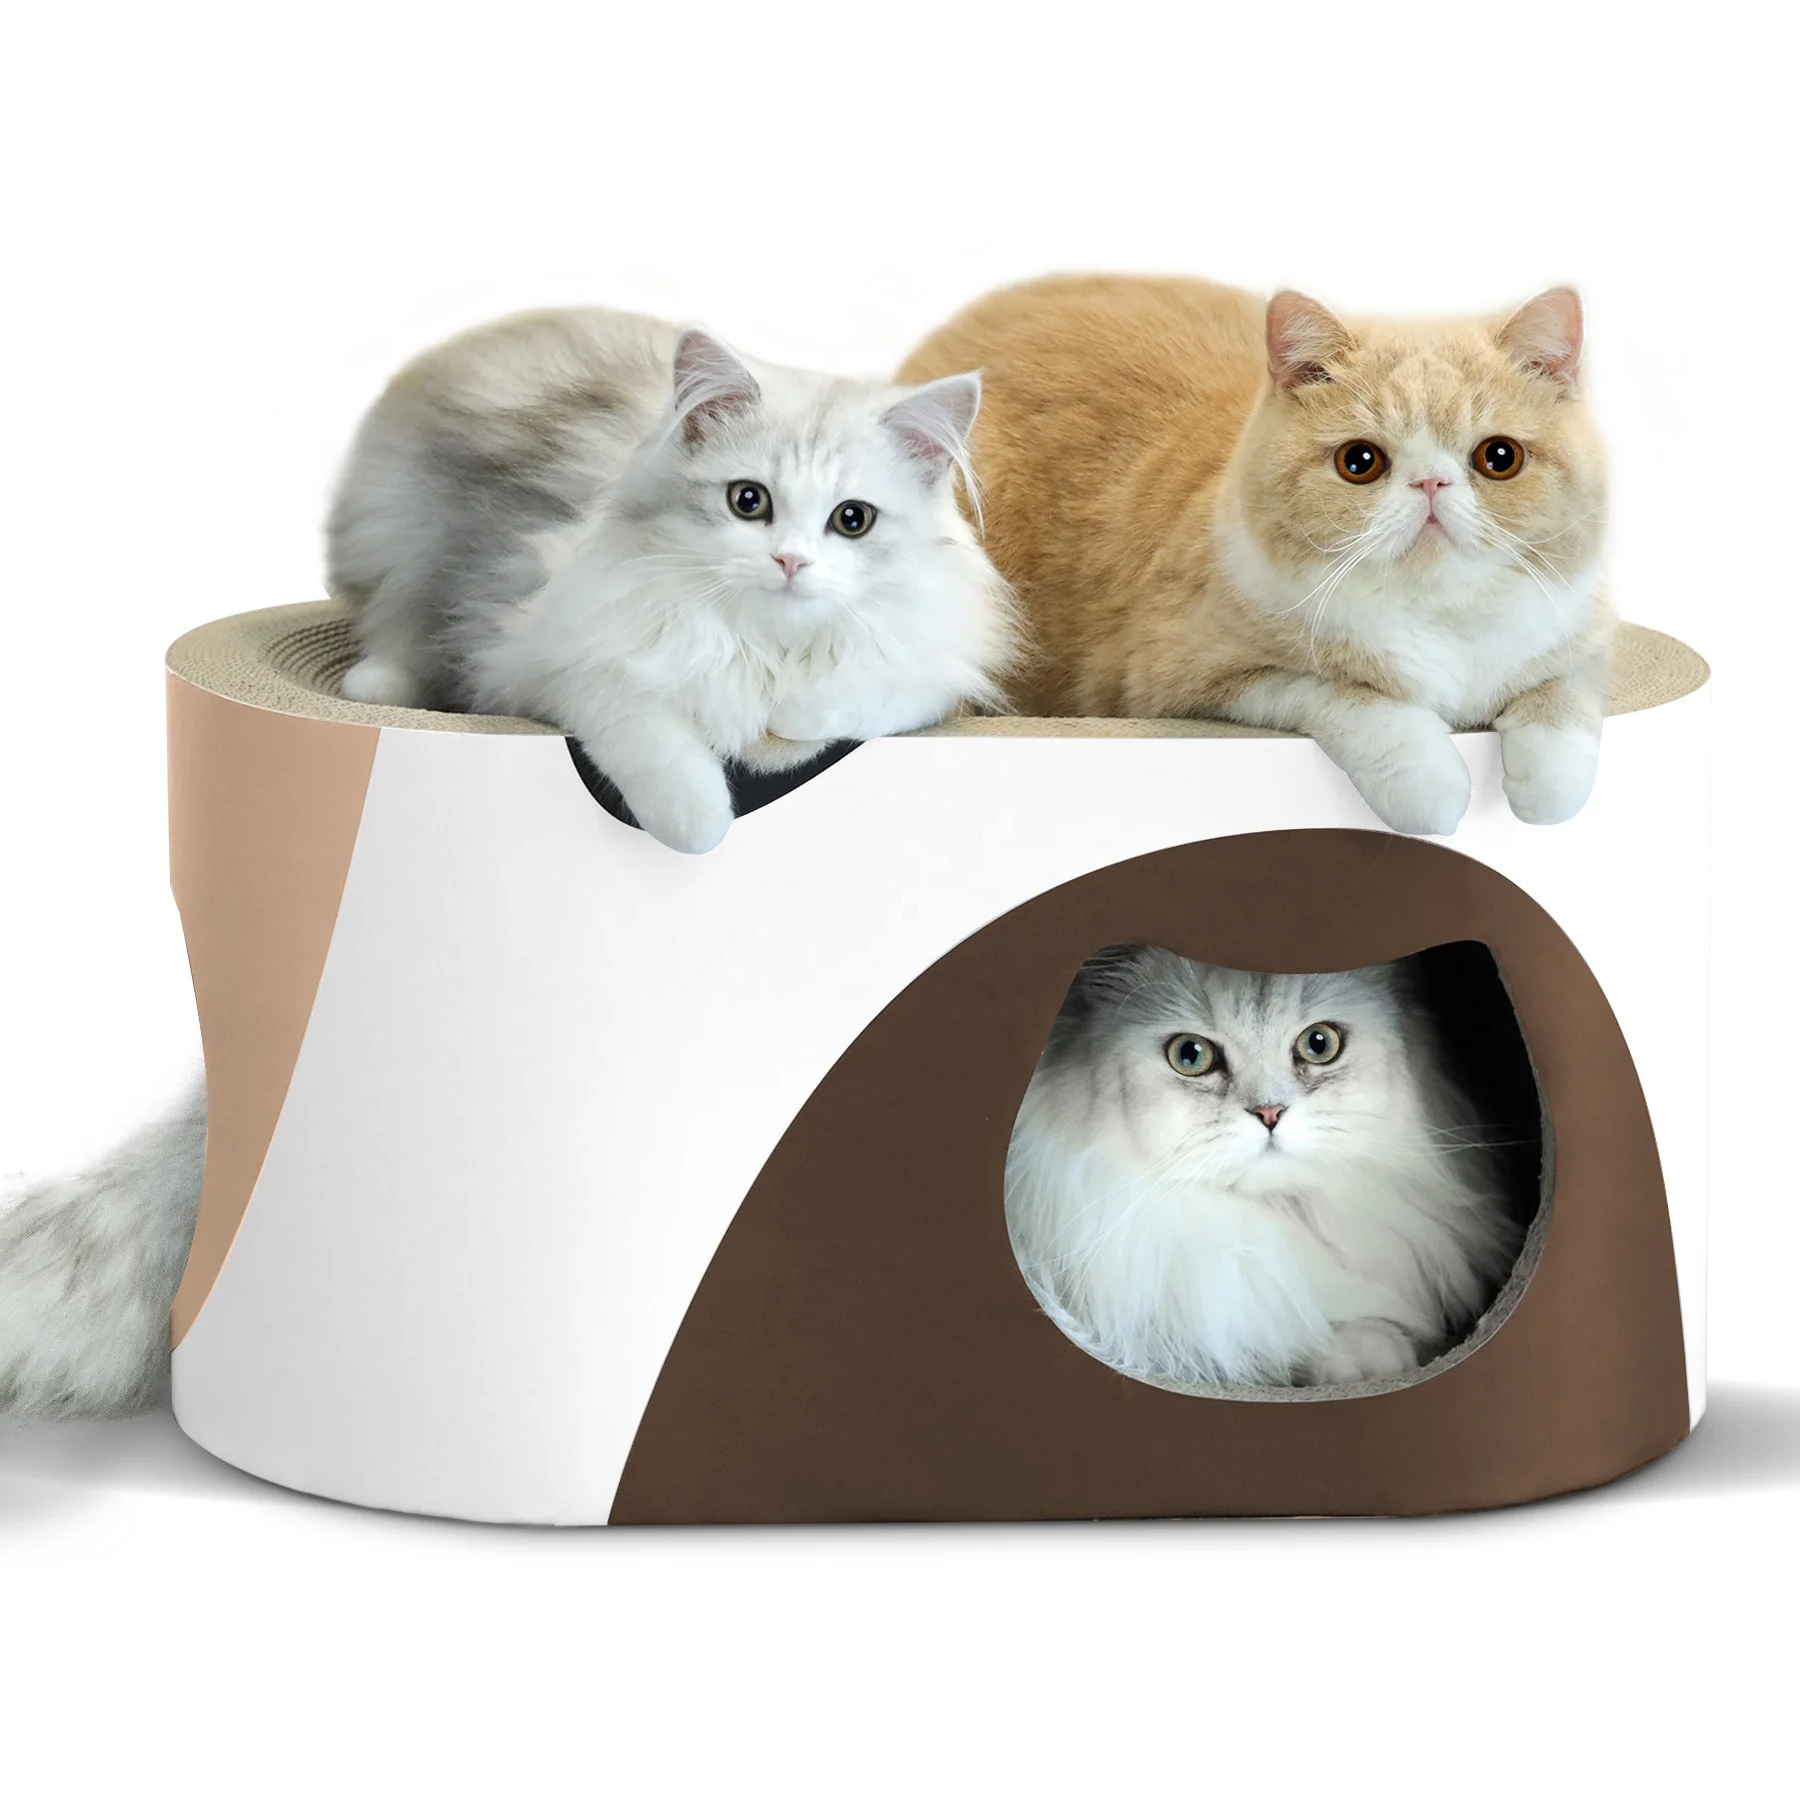 

cat pet play house with scratches cat tree corrugated carboard scratcher toys cat house round paper scratcher lounge bed, Picture showed